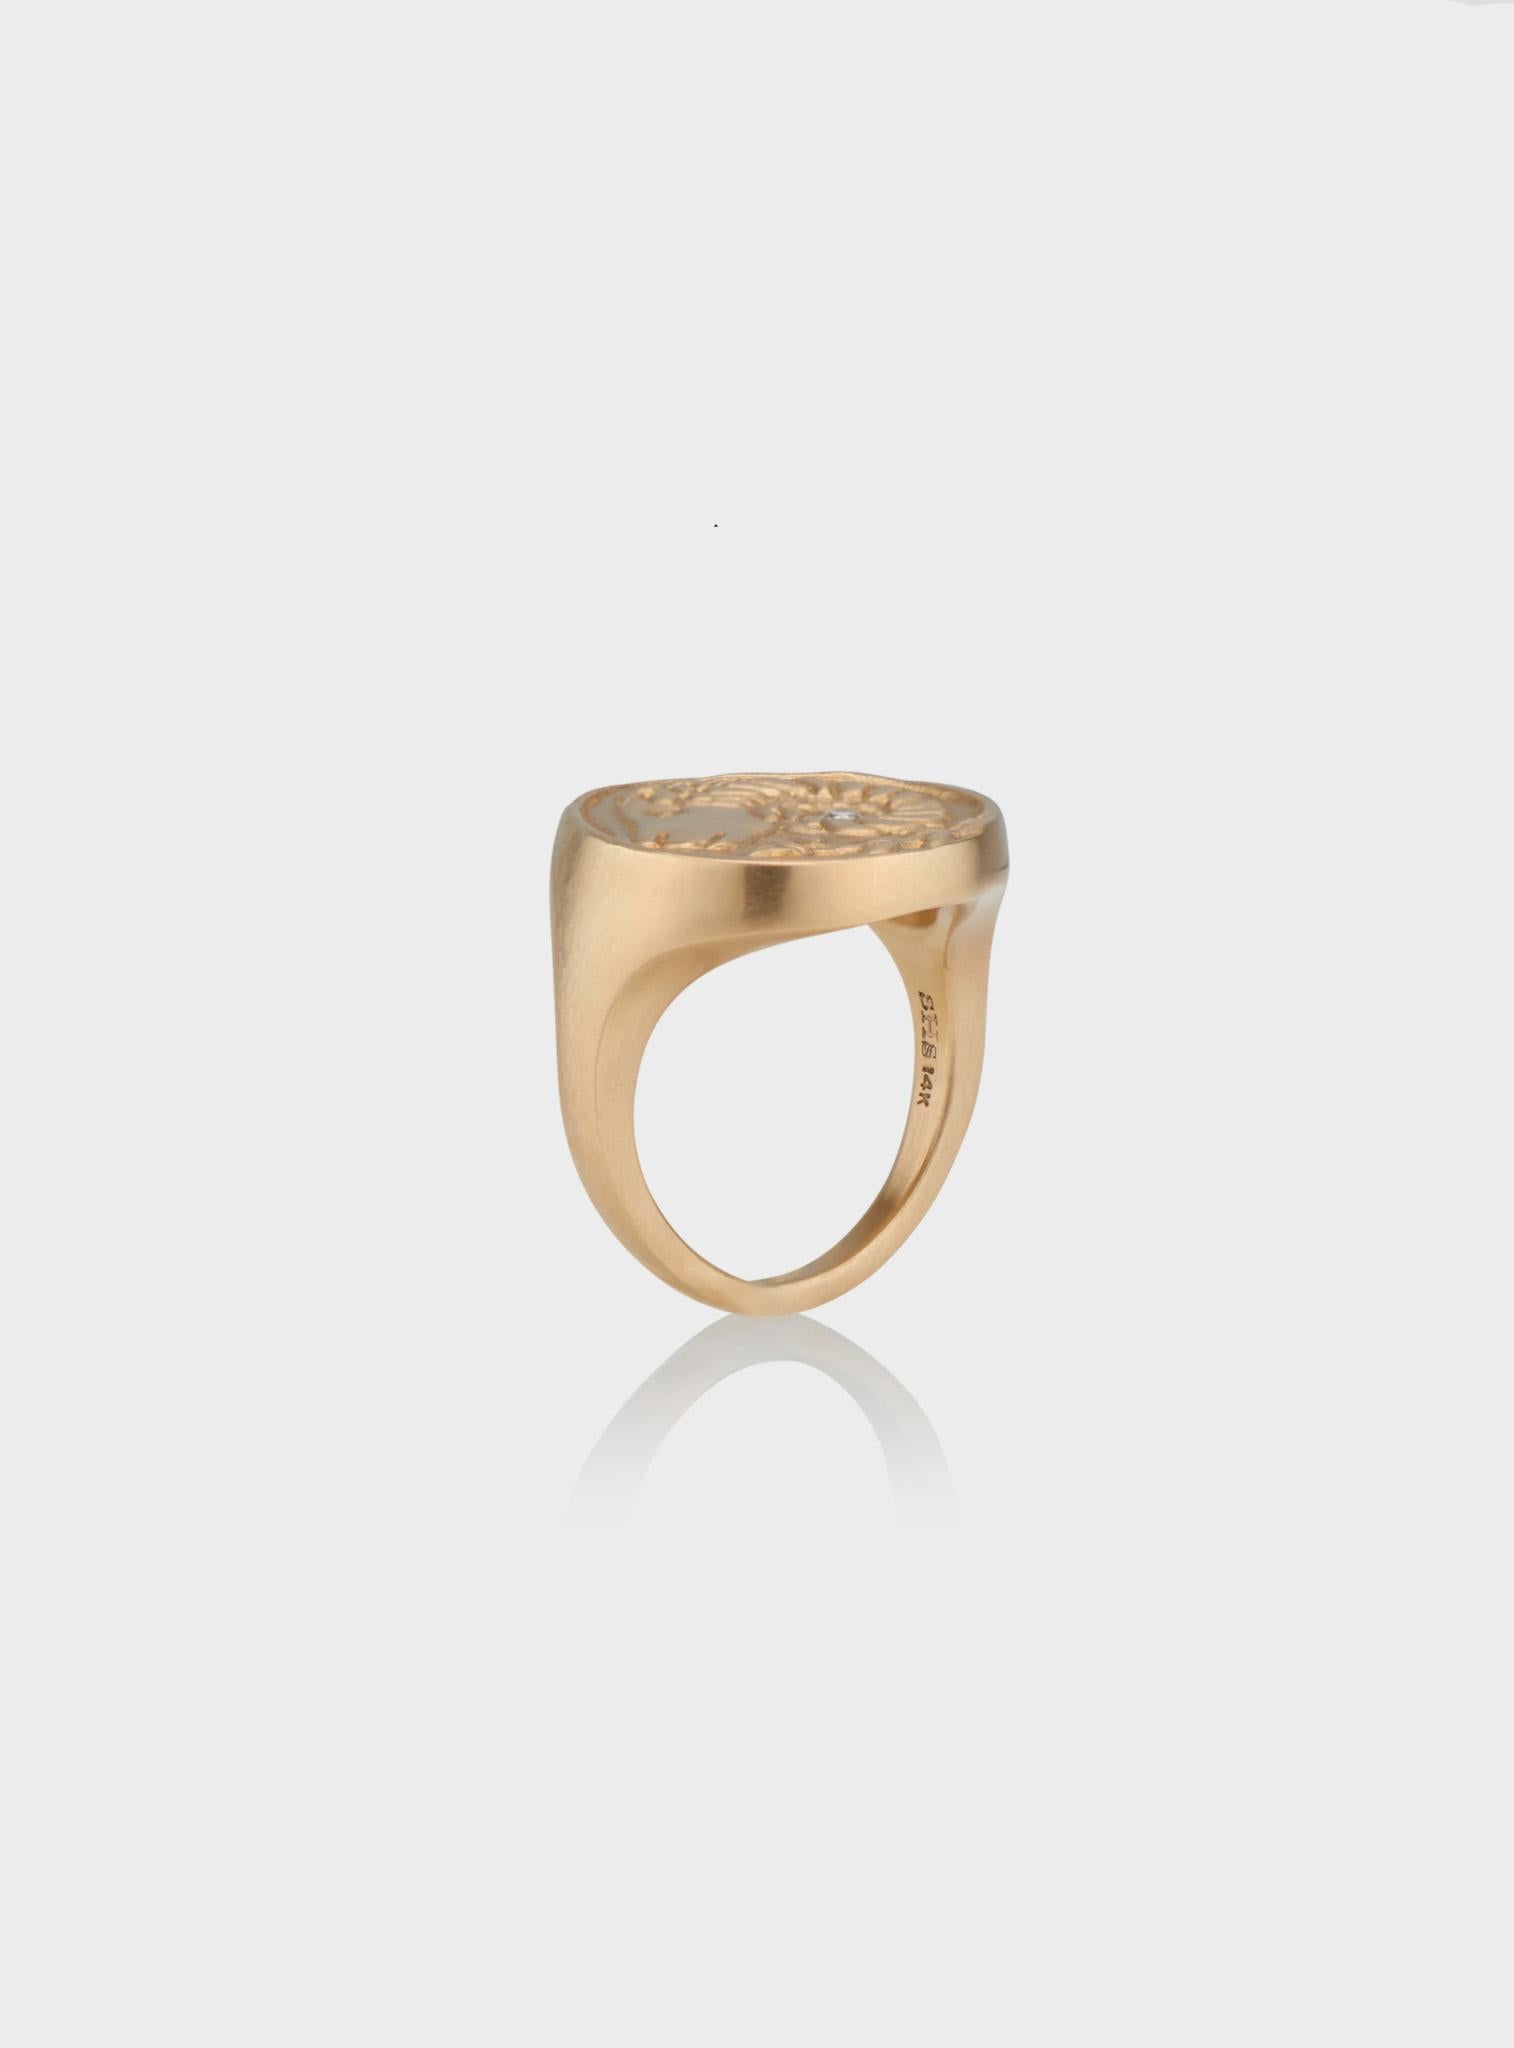 Cast from wax, hand-carved by designer Susan Highsmith, this ring is exquisitely designed, made, and finished.

It has a round, coin-like face, carved in relief to show twin girls facing each other, with a matching braid acting like a garland motif